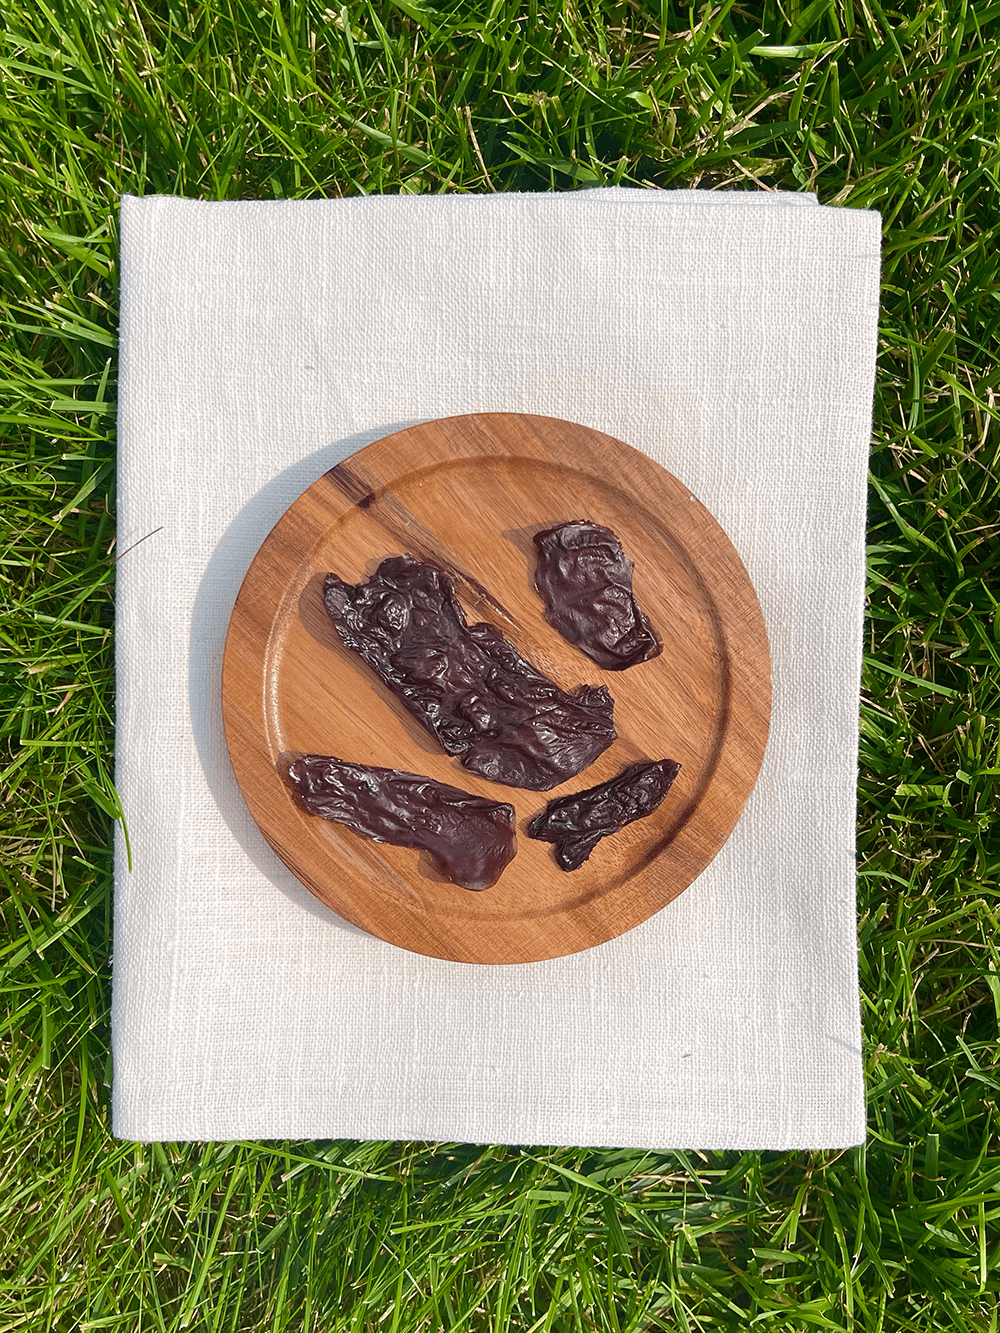 4571-chicken-liver-dehydrated-dog-treat.png